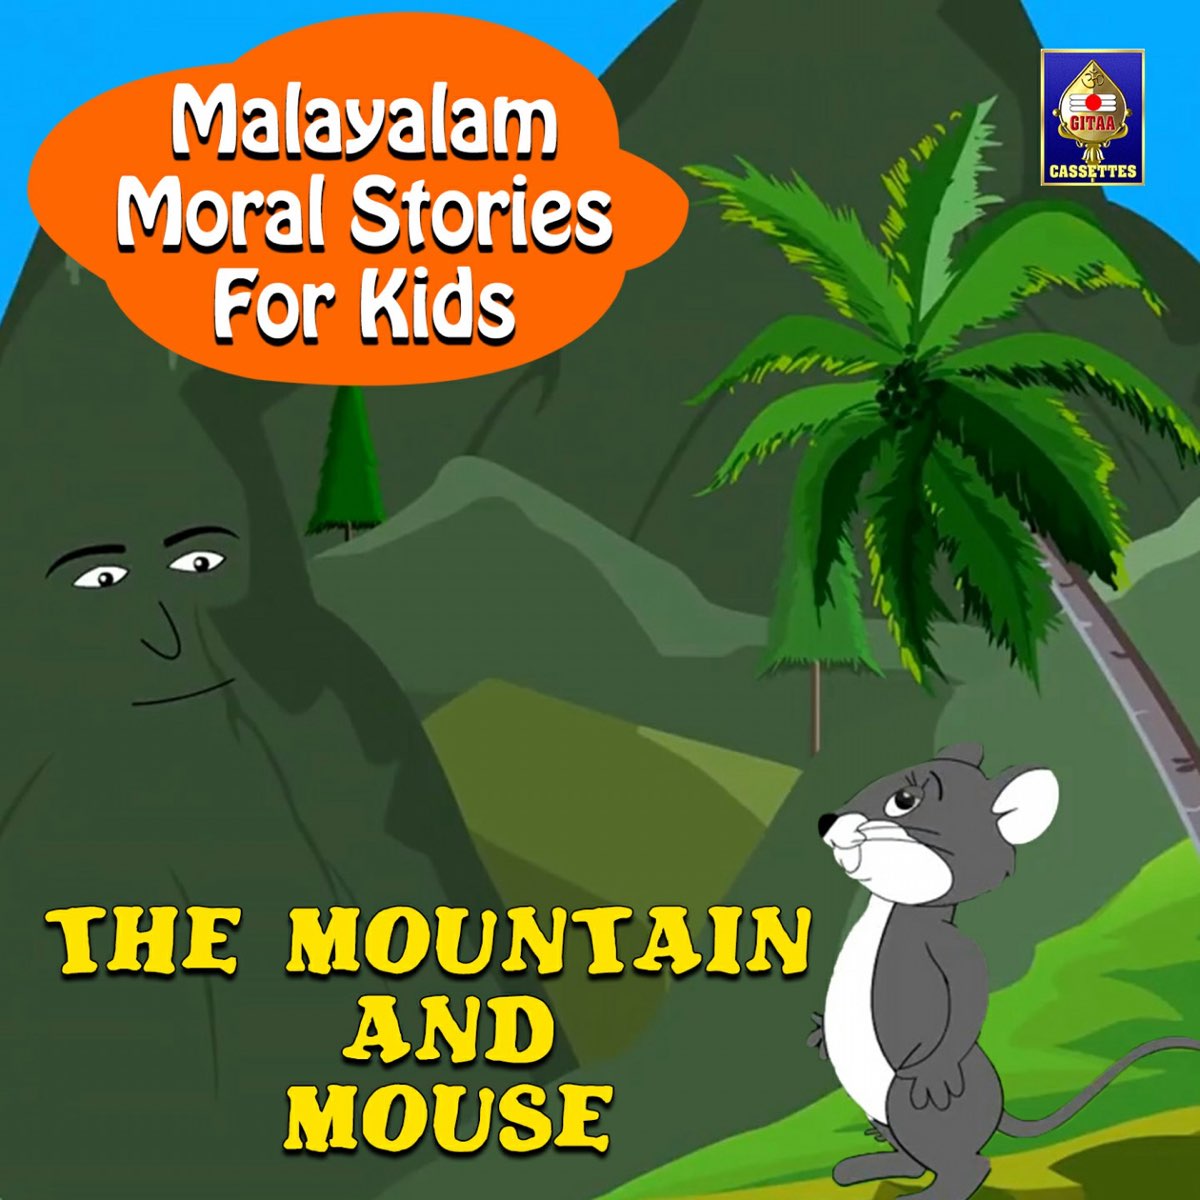 Malayalam Moral Stories For Kids - The Mountain and Mouse - Single by  Karthika on Apple Music